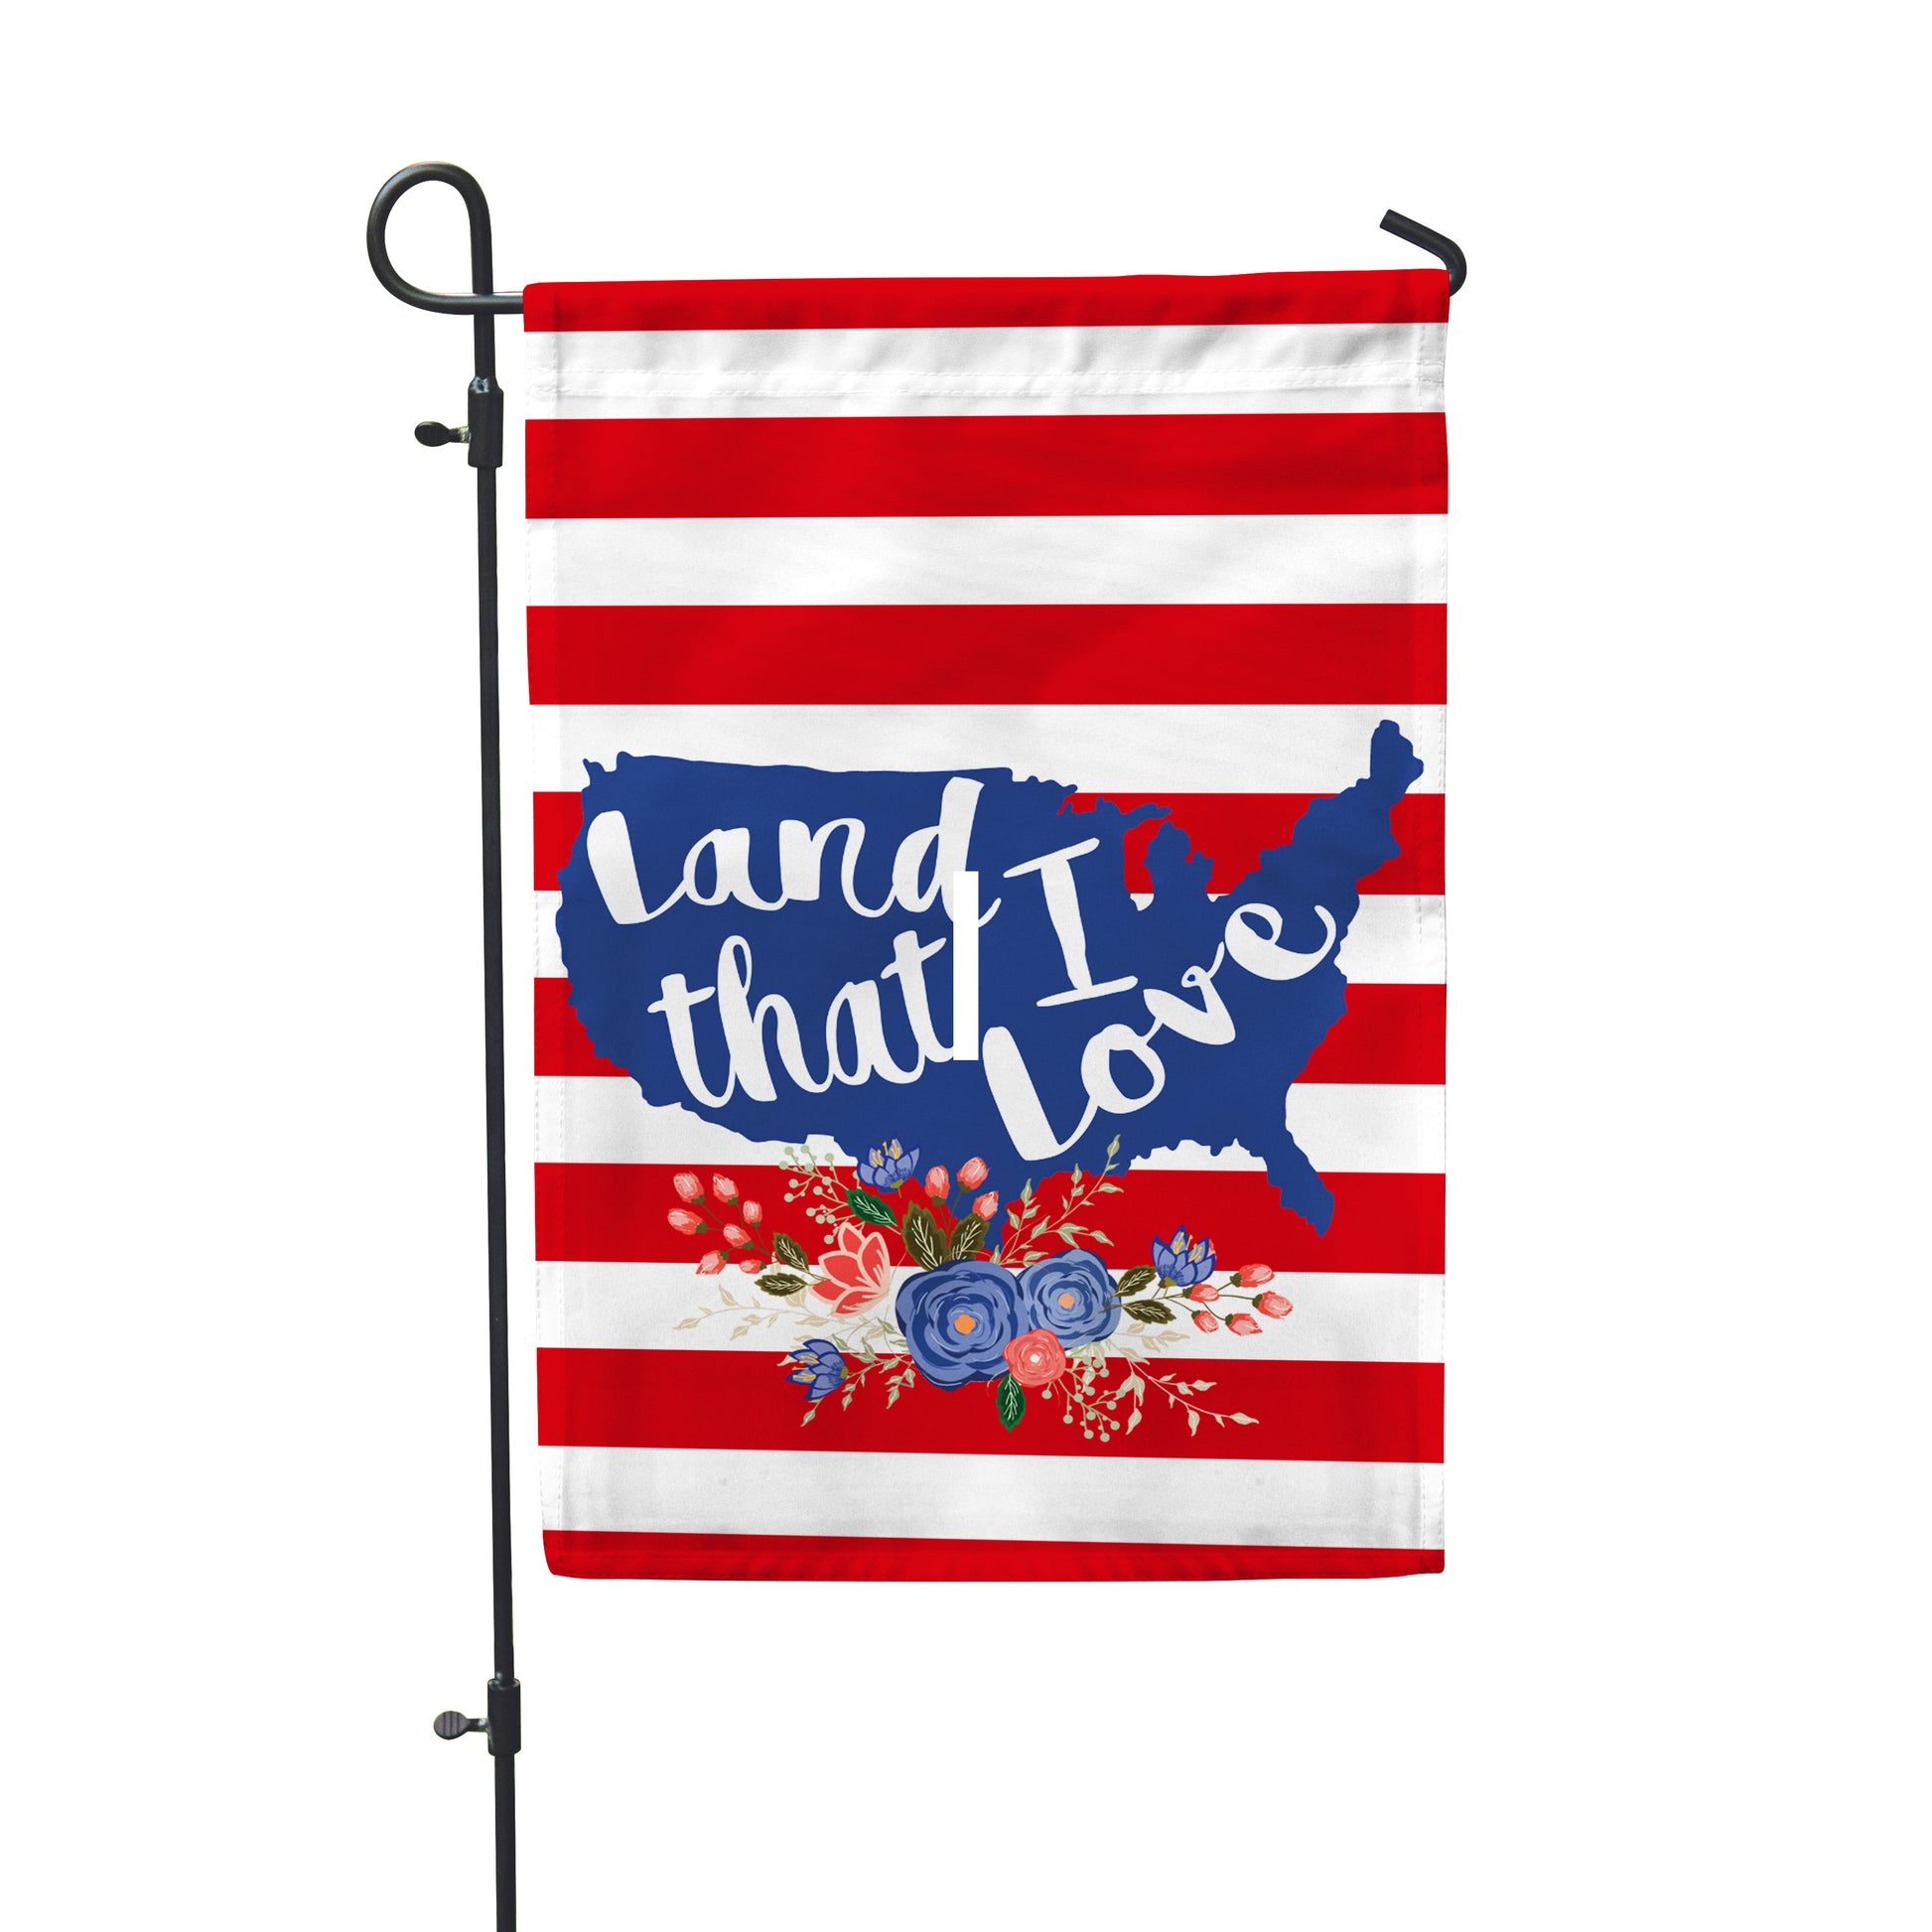 Land I Love Garden Flag 12" x 18" - Double Sided - Second East